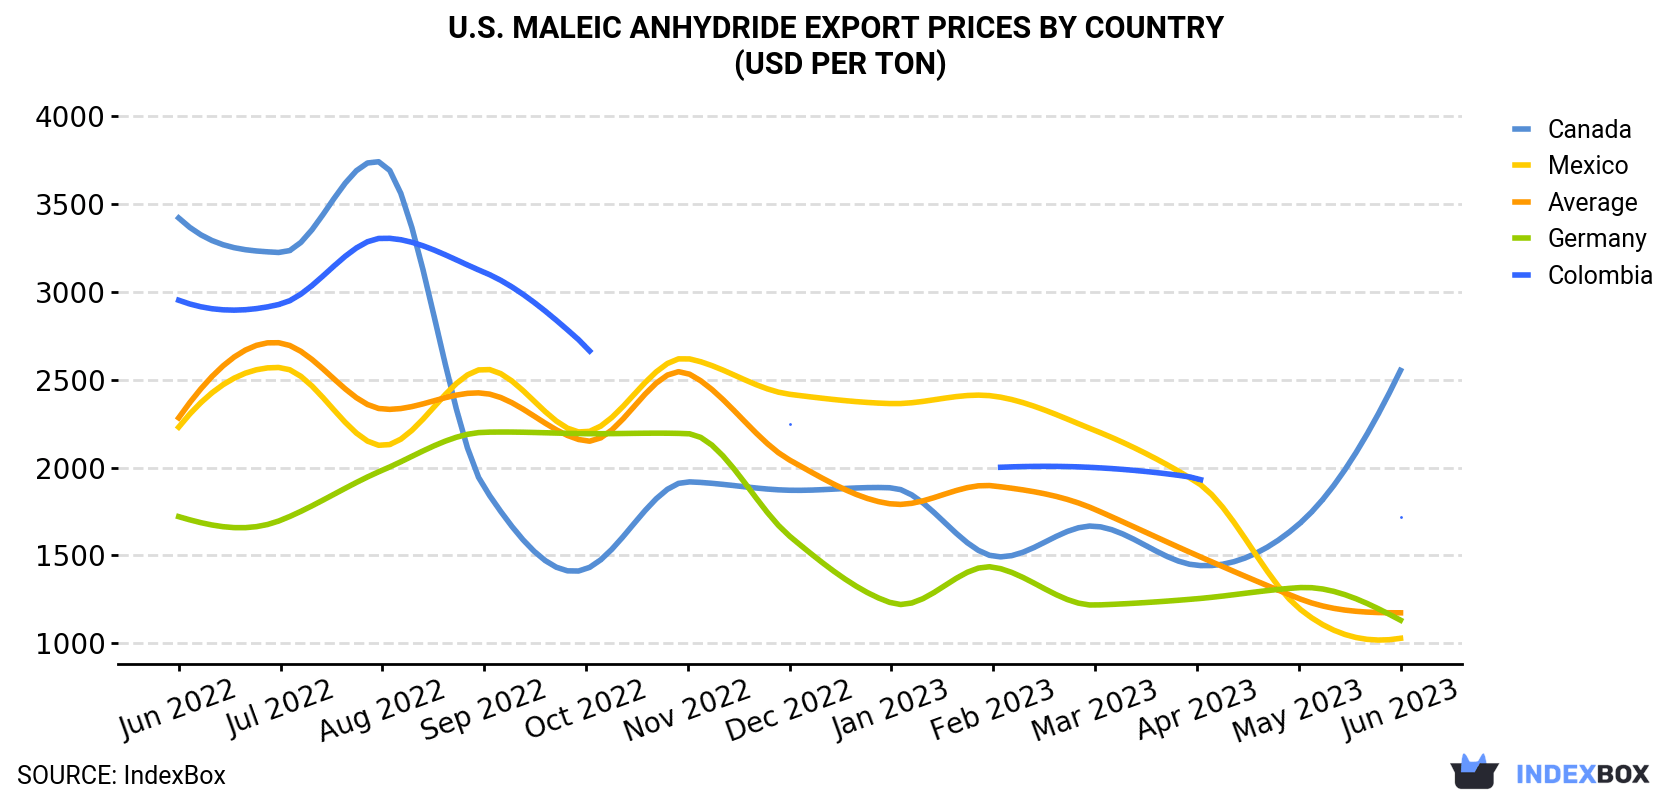 U.S. Maleic Anhydride Export Prices By Country (USD Per Ton)